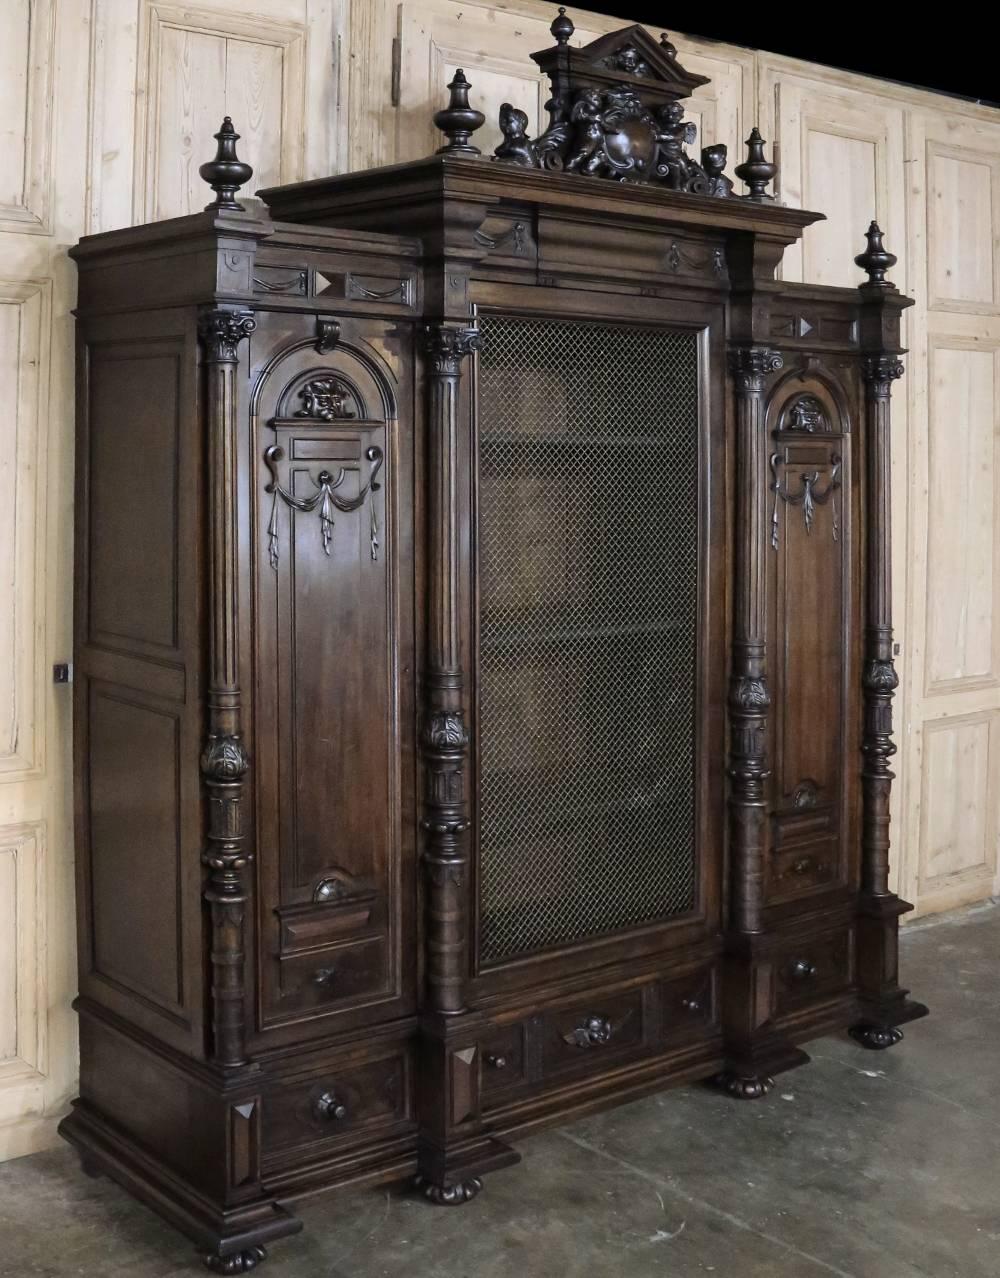 Resplendent with sculpted angels and classical architecture, this stupendous 19th century Italian Renaissance triple armoire was fashioned from solid walnut and features an impressive crown punctuated by two sizes of turned finials, elaborate and